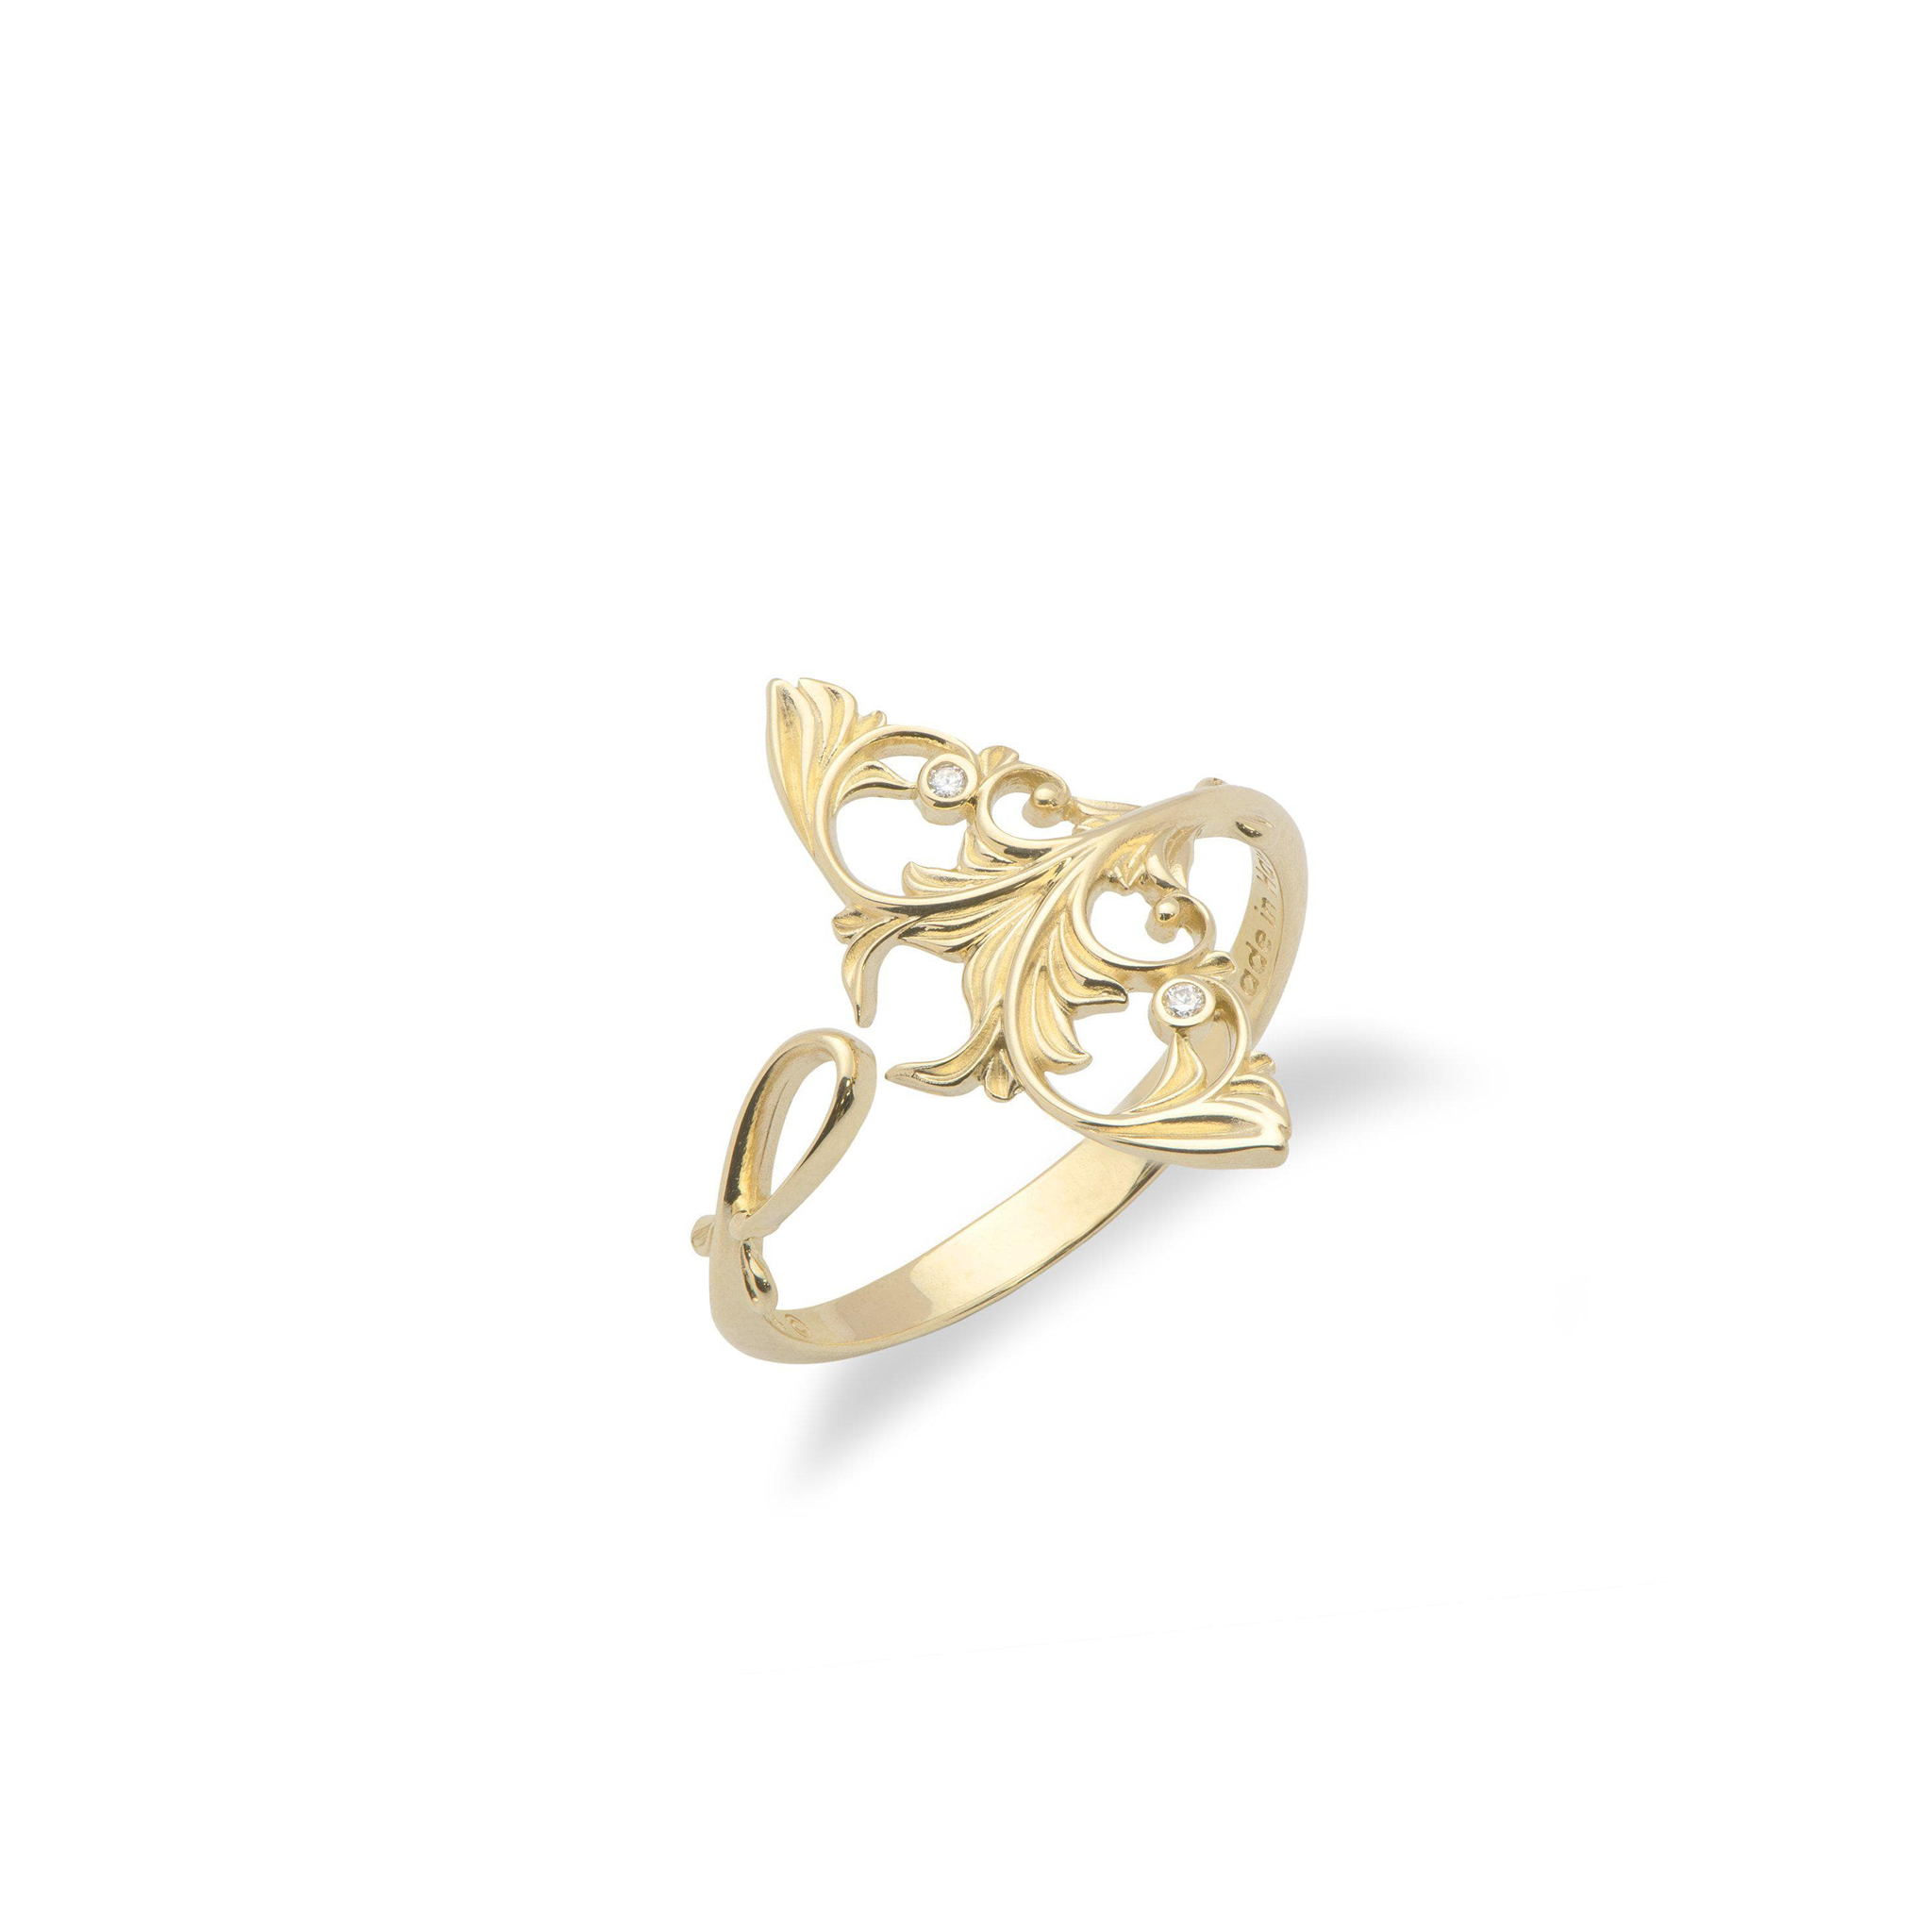 Living Heirloom Manta Ray Ring in Gold with Diamonds - 20mm